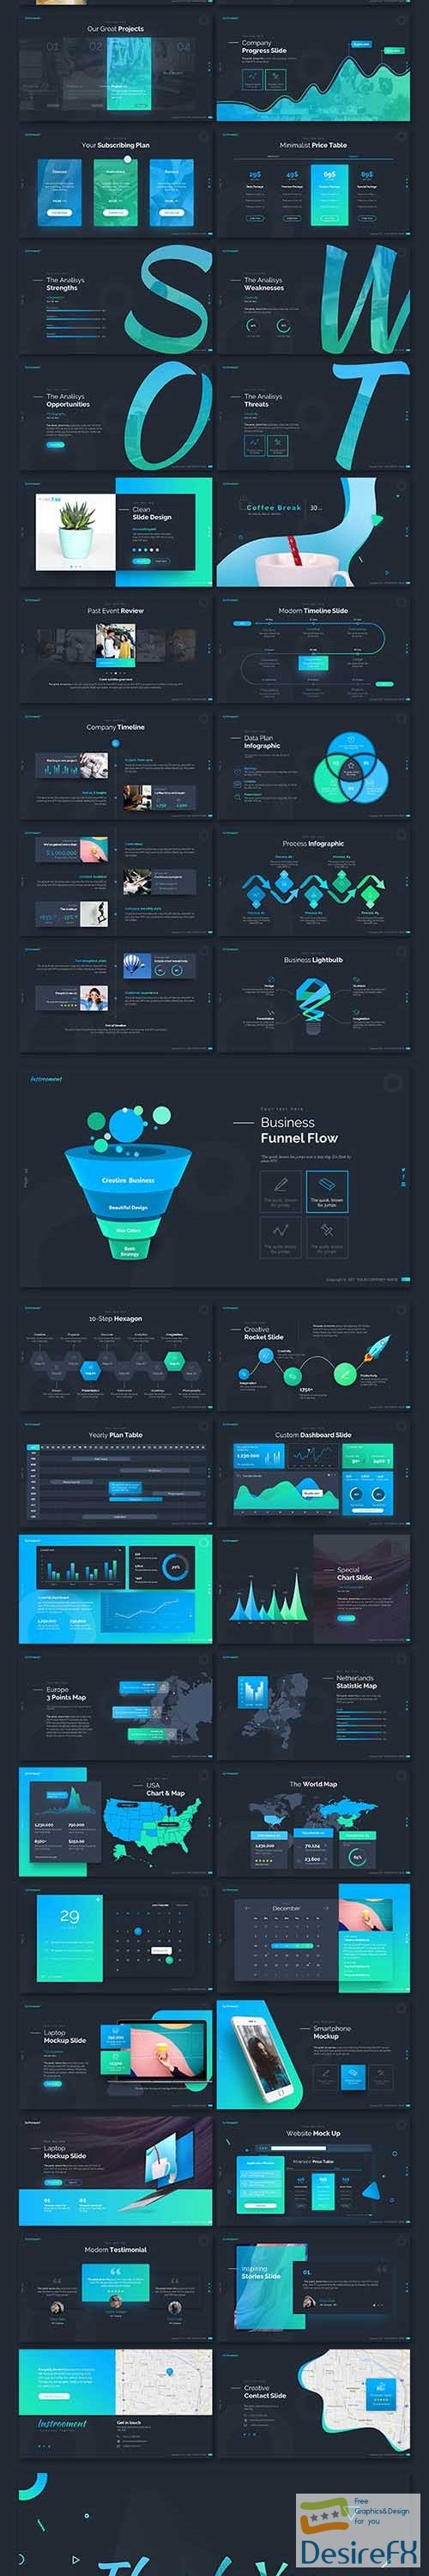 Instrooment Creative PowerPoint Template 21055619